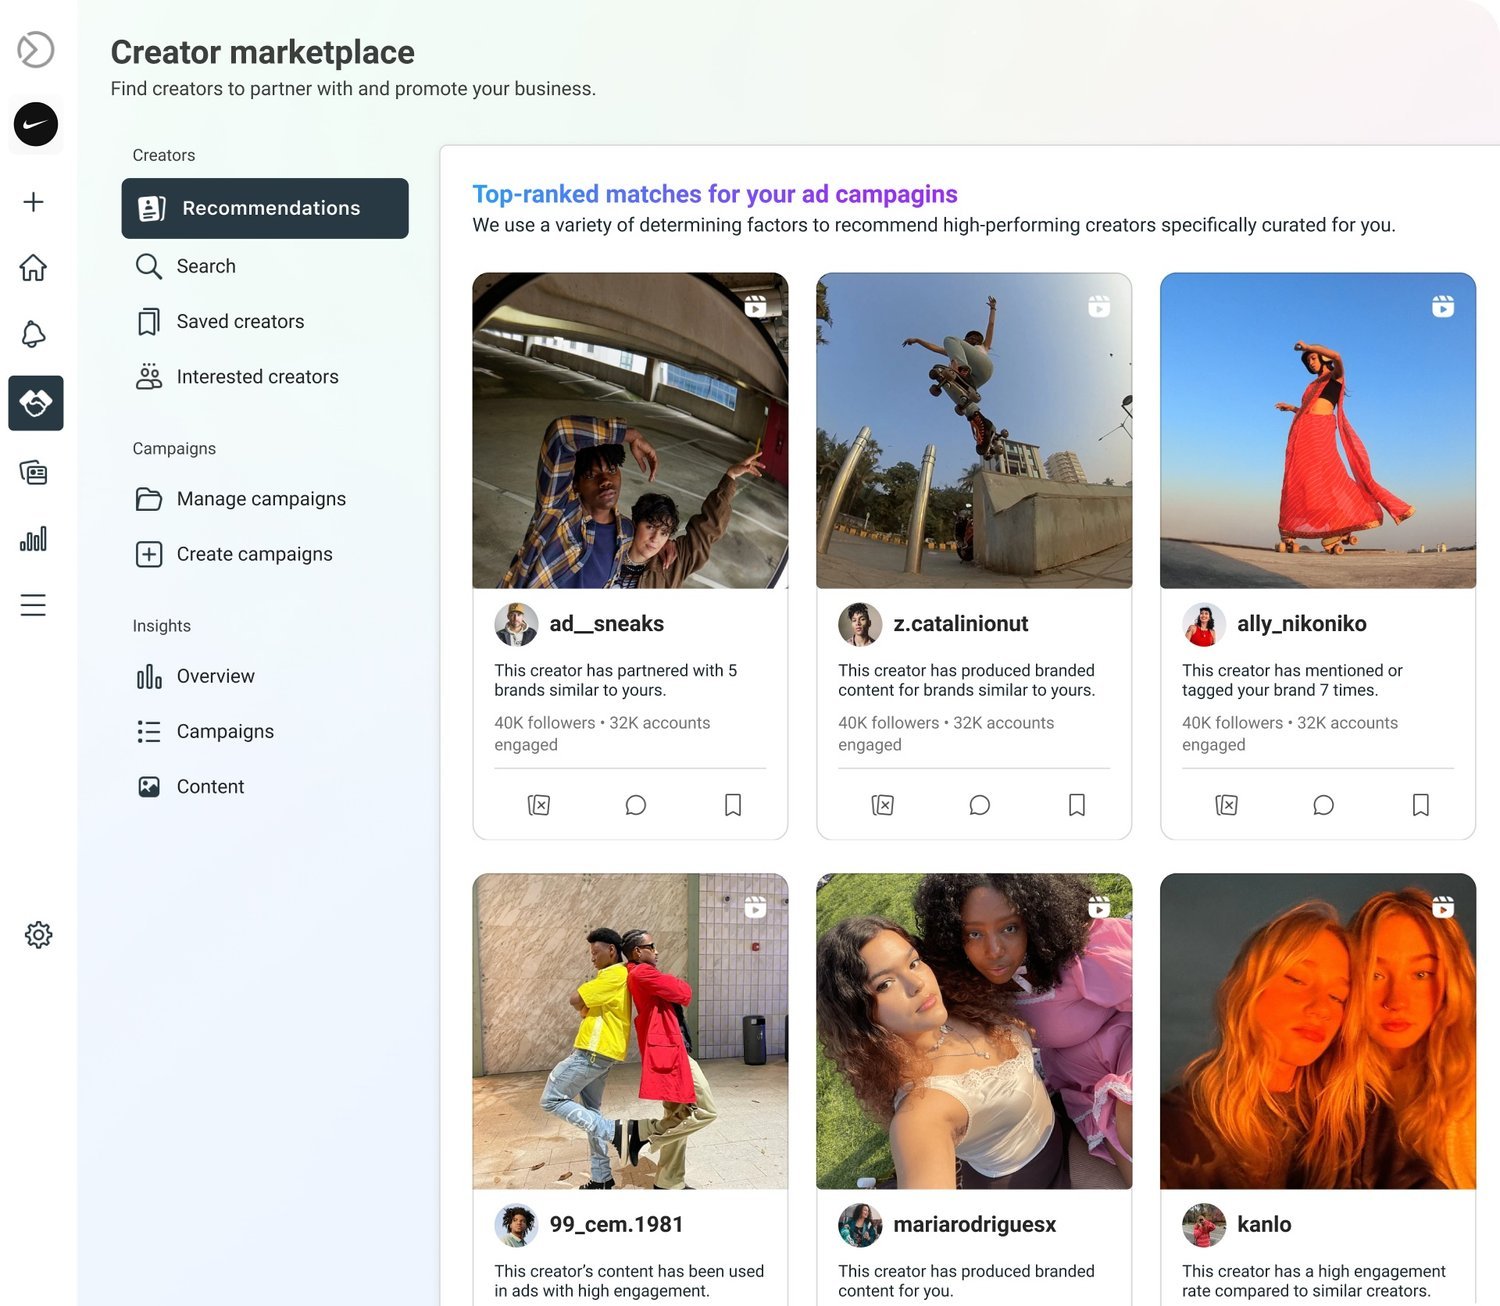 Instagram Expands Its Creator Marketplace to New Regions with Machine-Learning-Powered Creator Recommendations